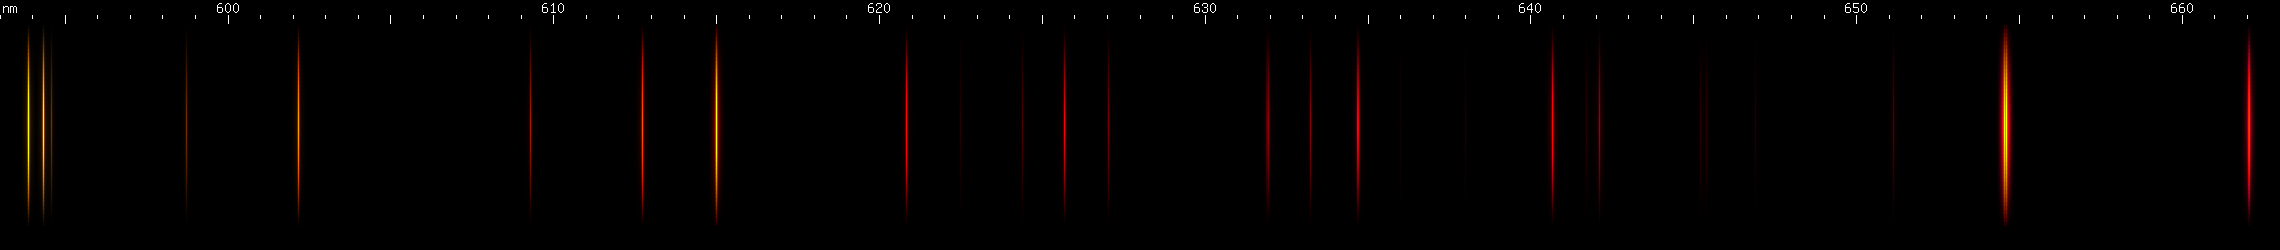 Spectral lines of Magnesium.